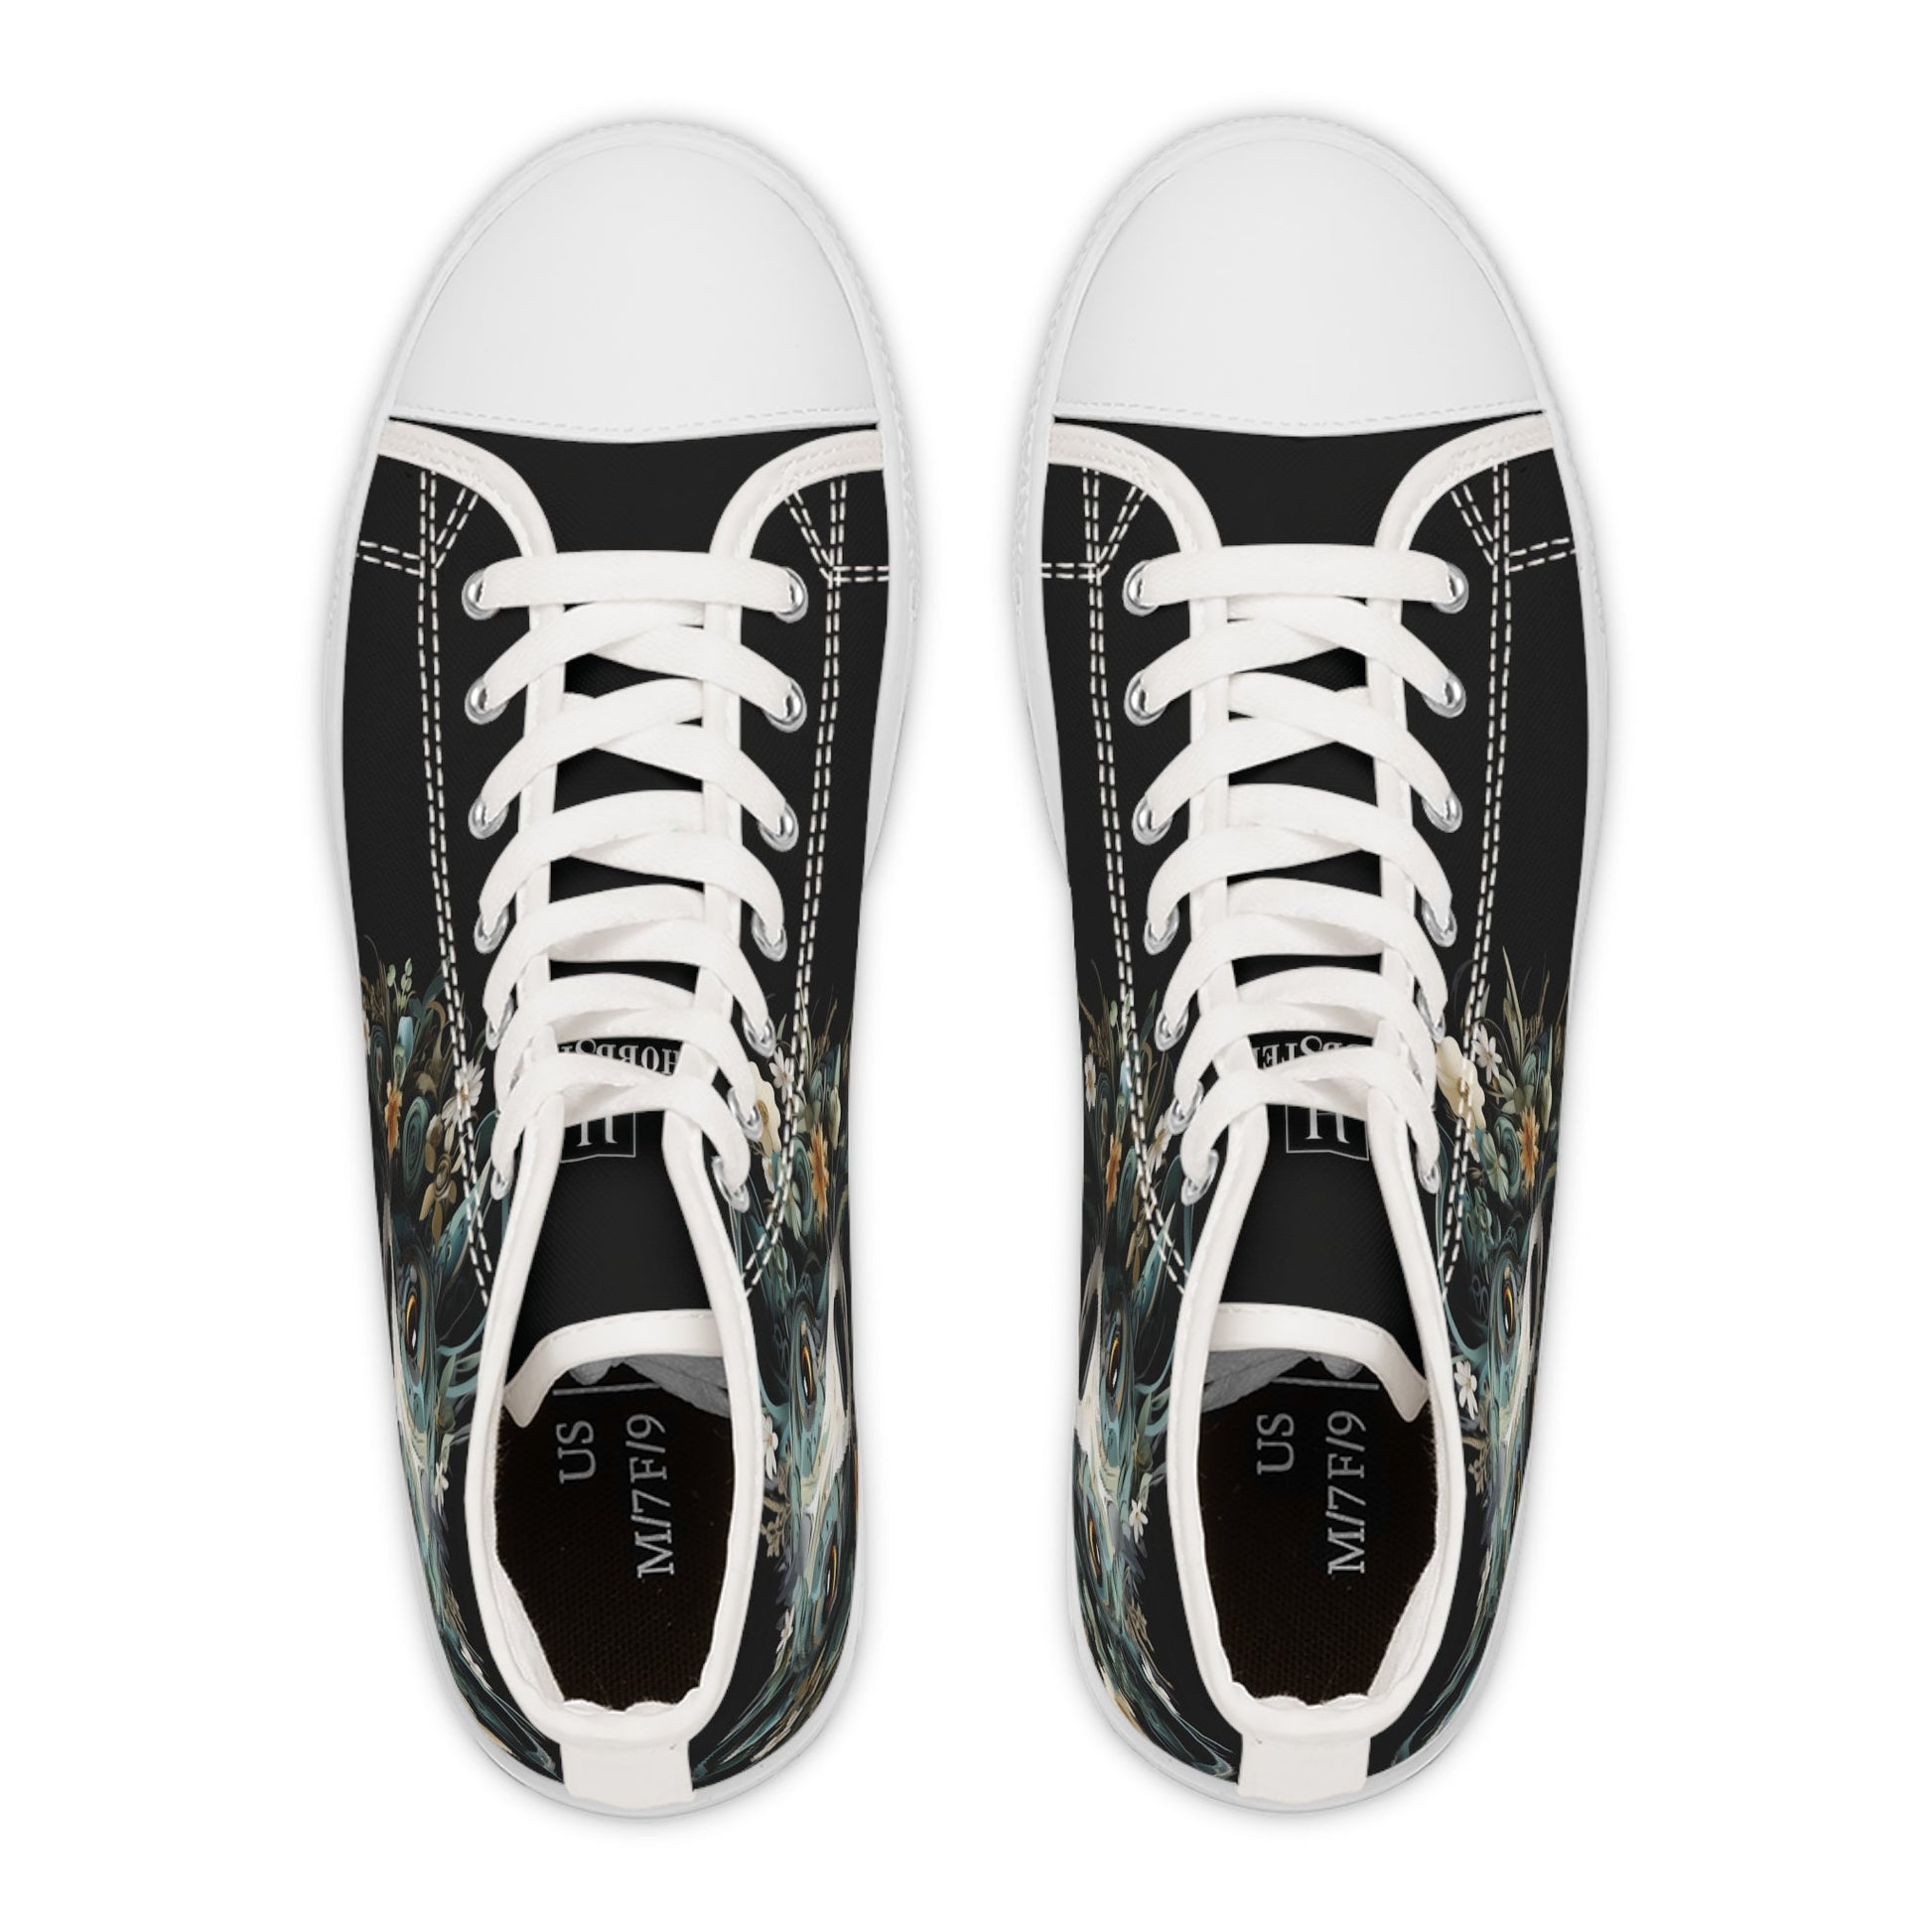 Women's High-Top Trainers featuring a Greyhound Paper Quilling Effect Design - Hobbster